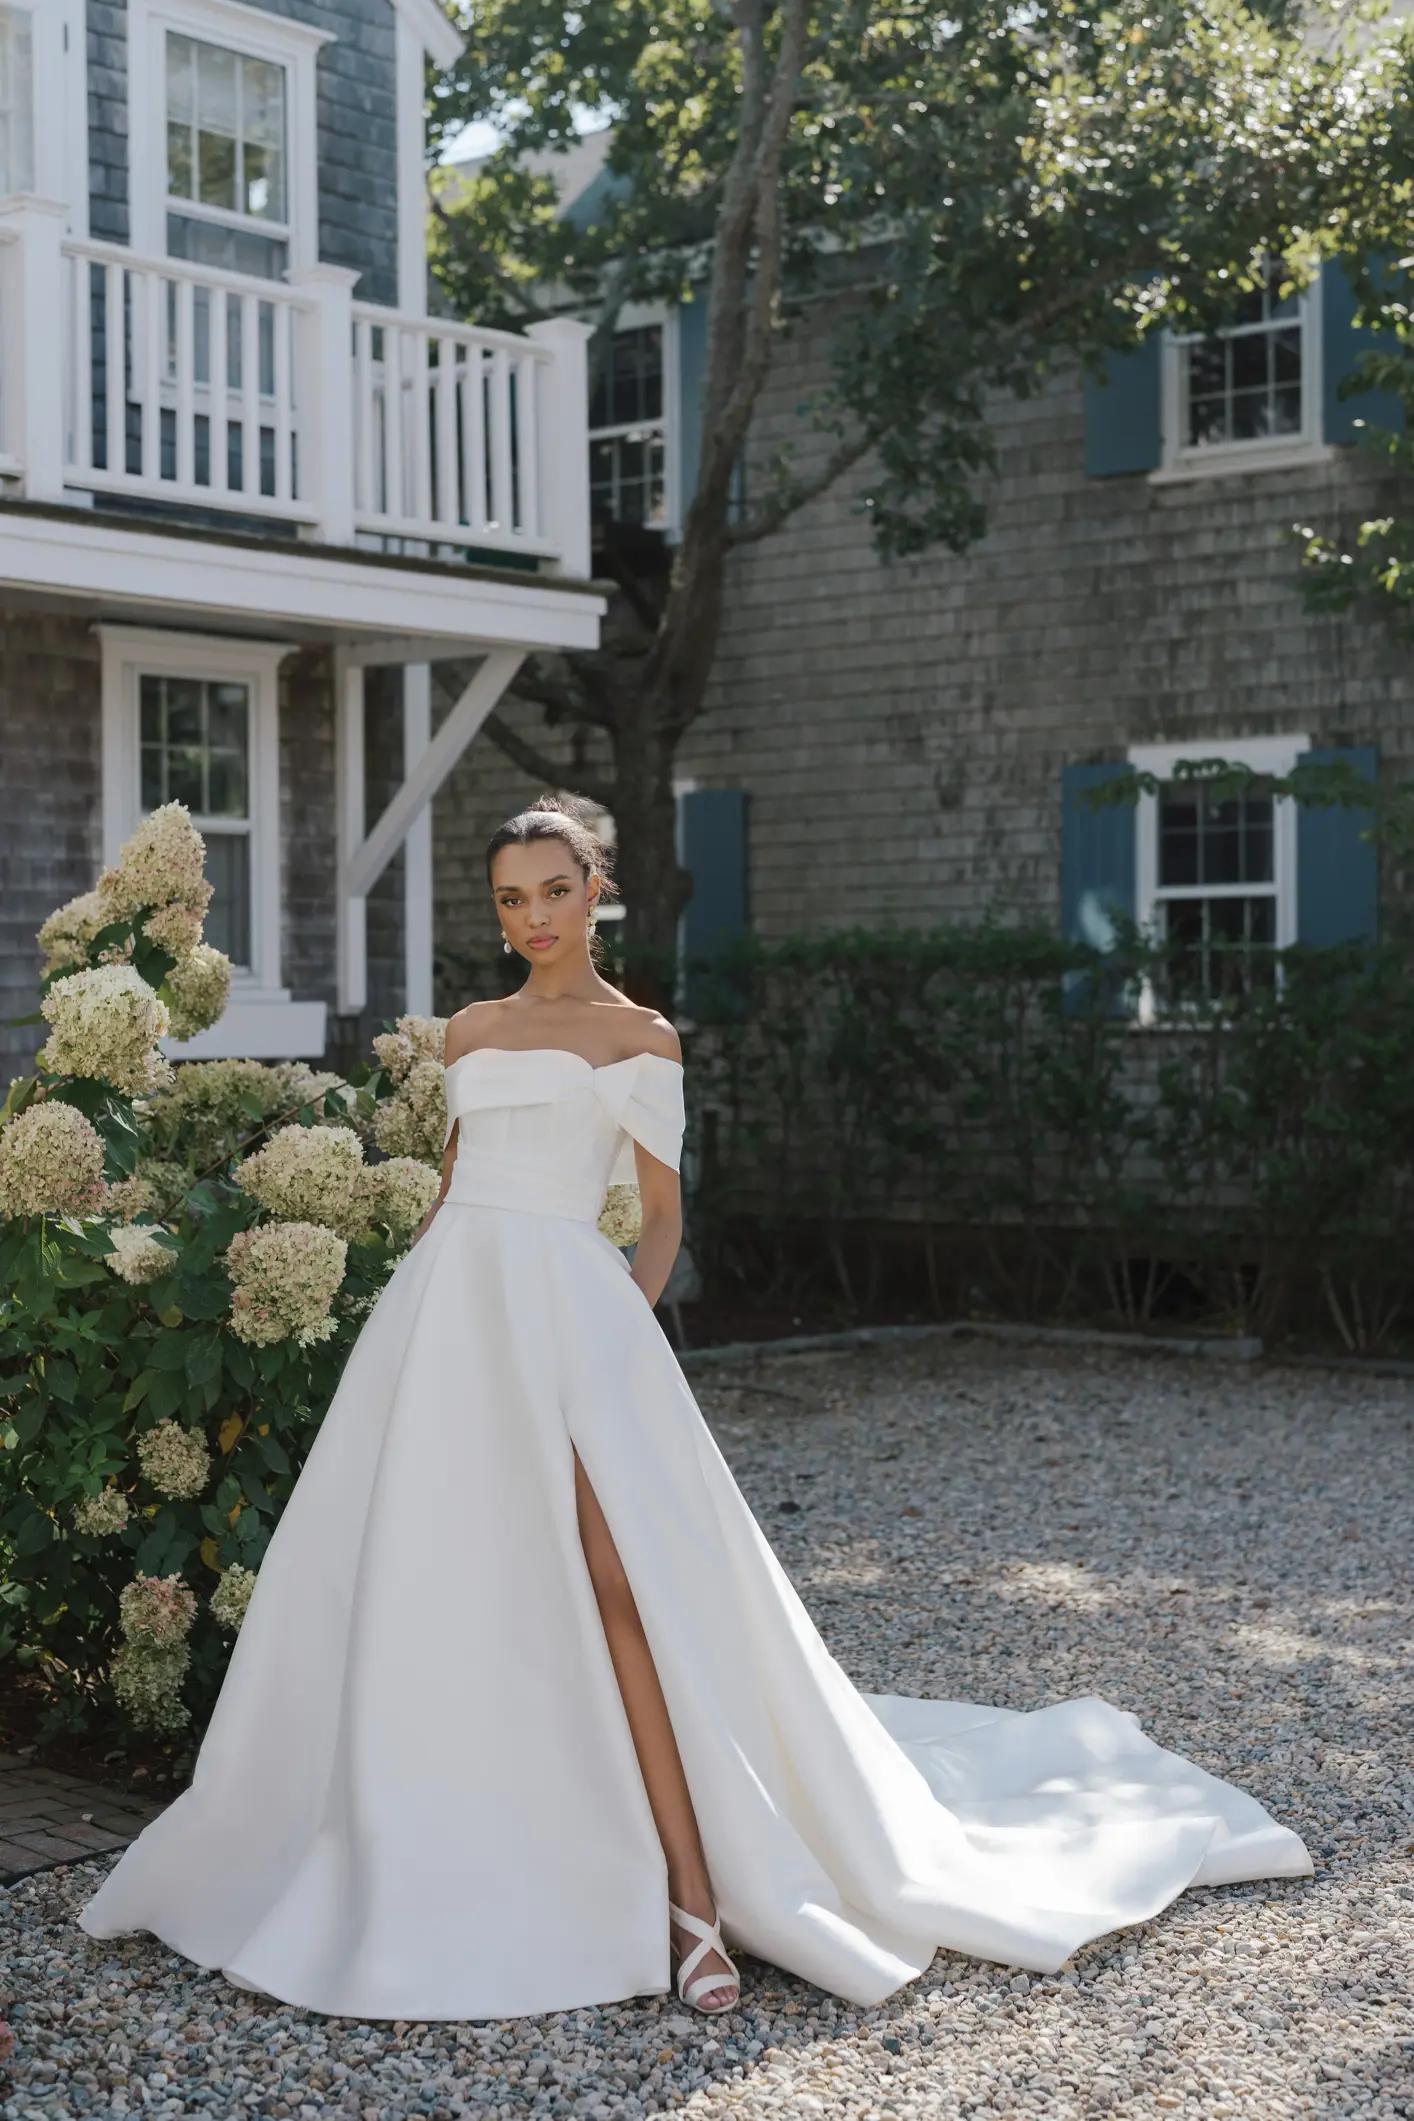 Warren ballgown wedding dress by Anne Barge in Columbus, Ohio with off the shoulder corset bodice and slit